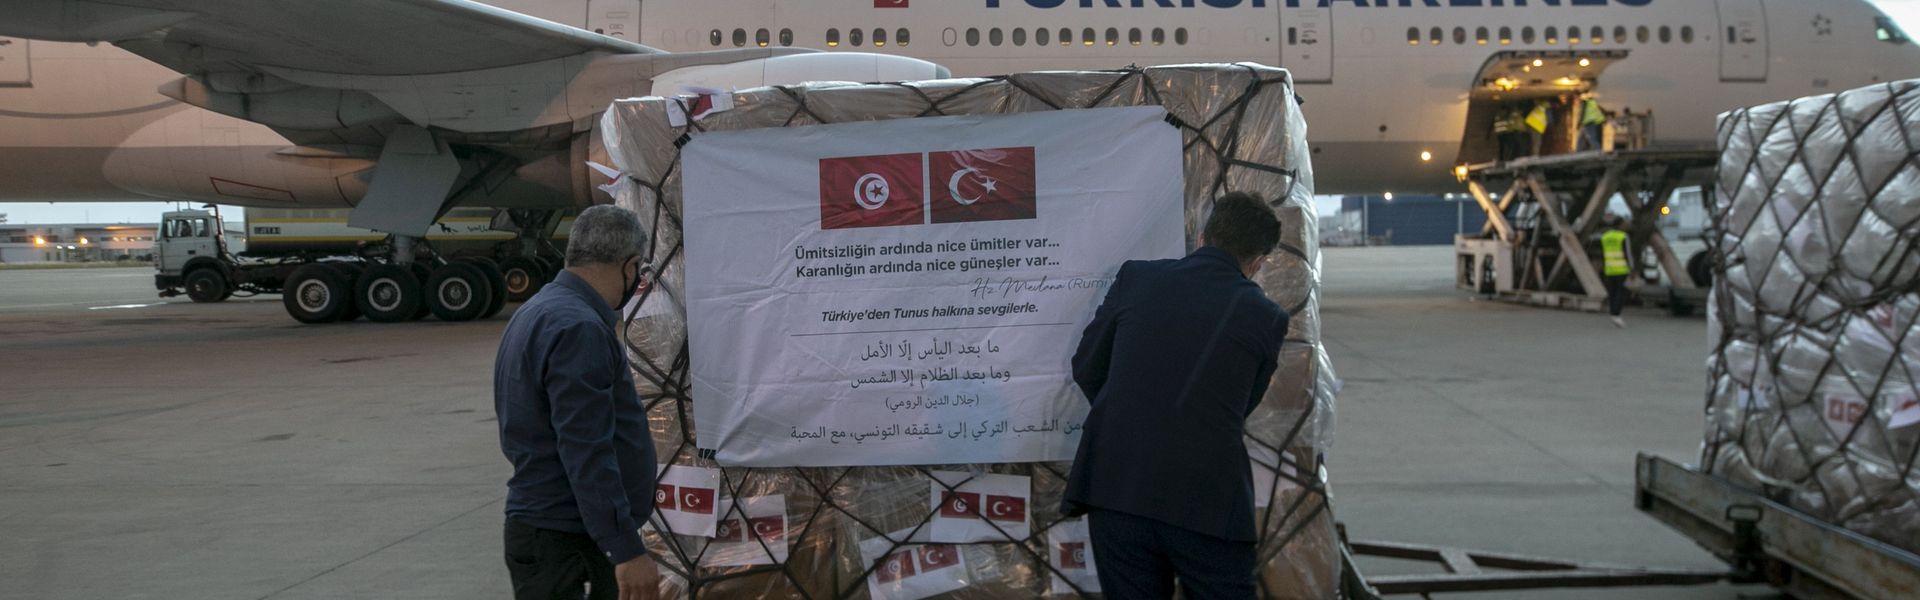 Medical aid packages sent by Turkey to support Tunisia in the fight against coronavirus pandemic arrive in Tunis